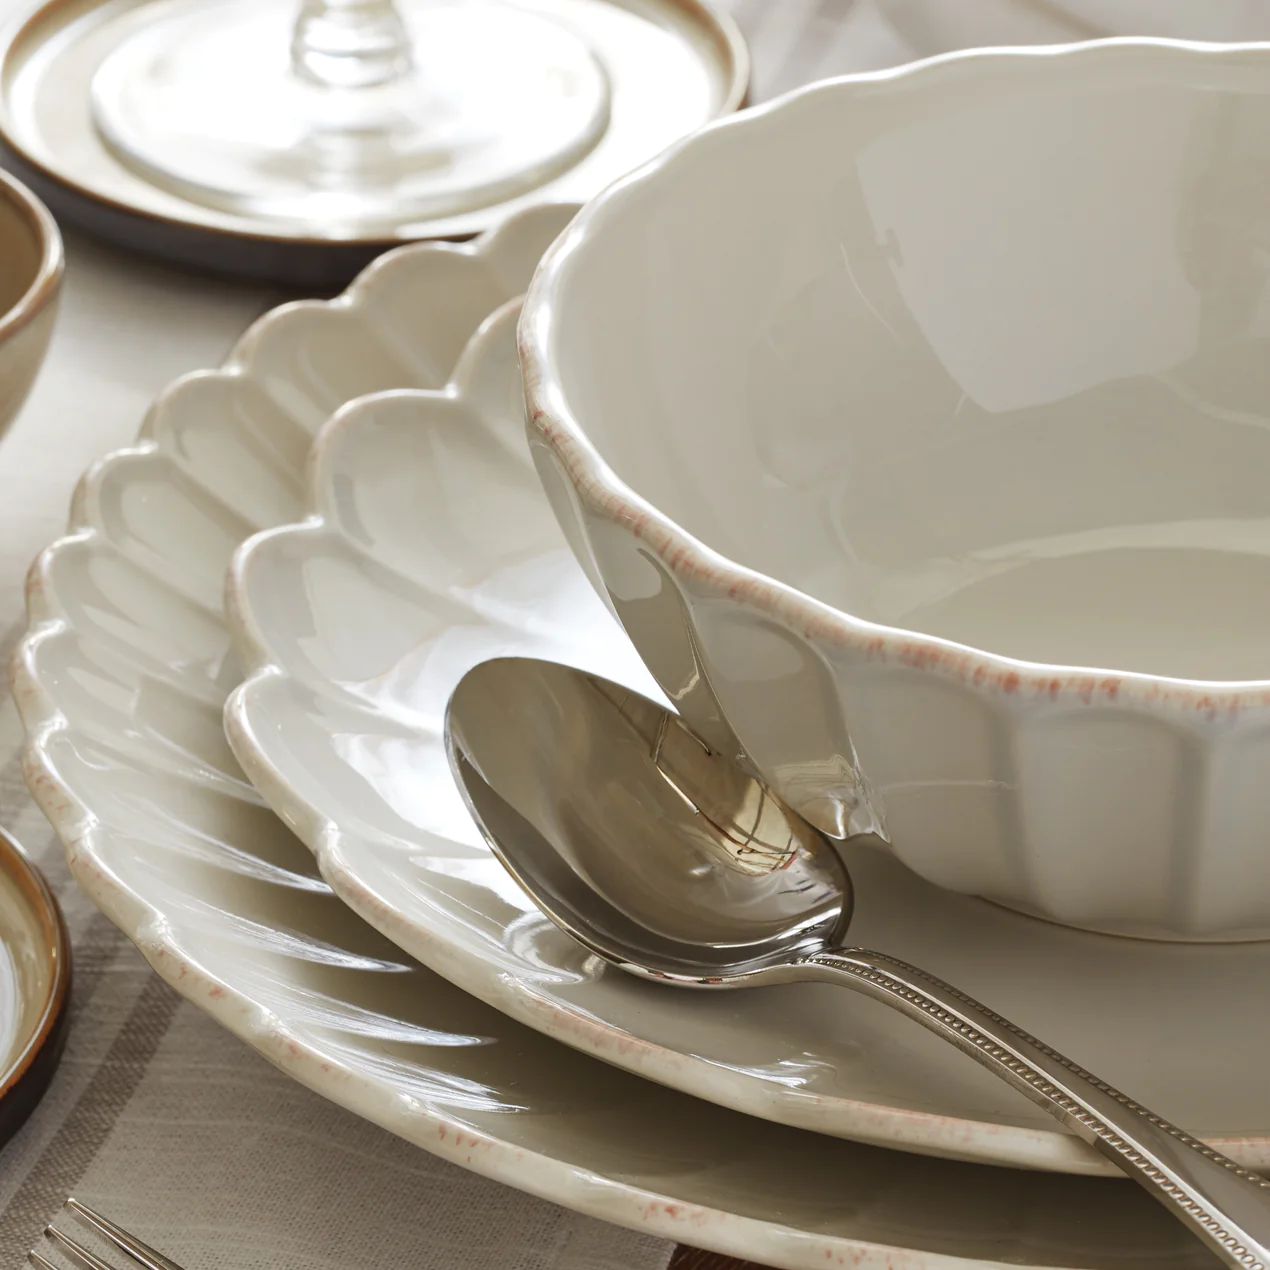 French Perle Scallop 4-Piece Accent Plate Set | Lenox